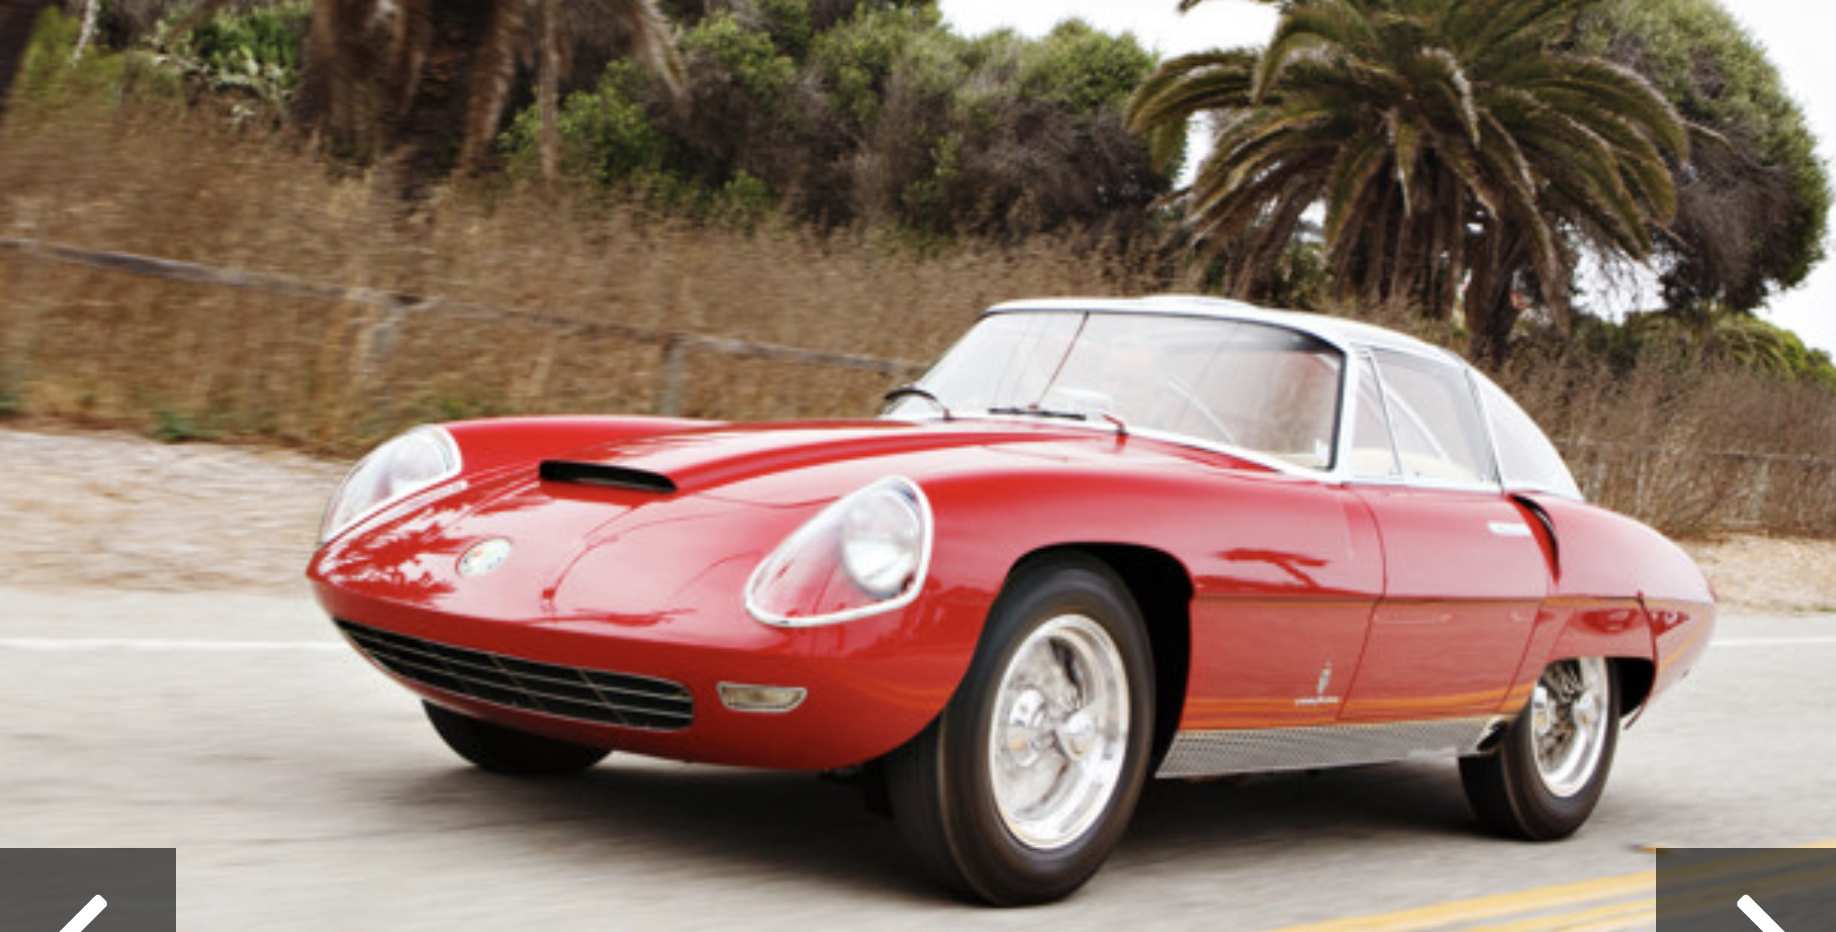 Gooding Has A Prototype For Auction During Monterey Car Week